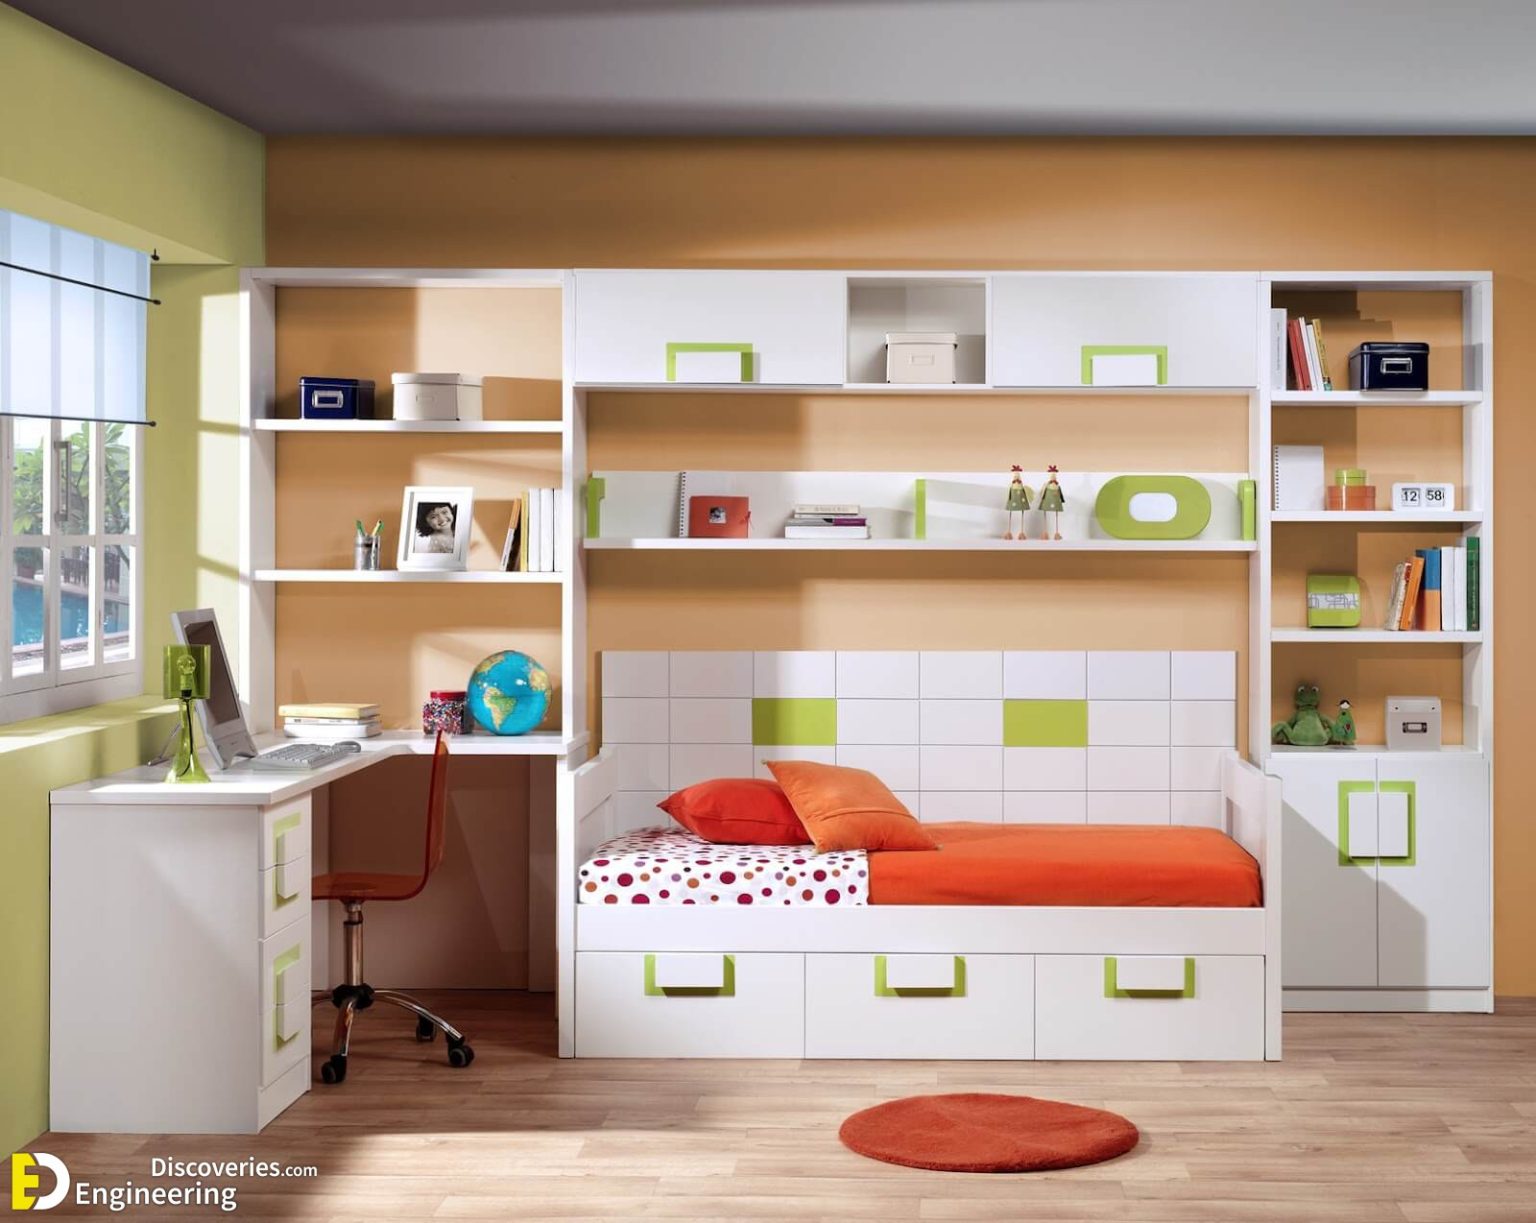 Brilliant Space Saving Ideas For Your Home | Engineering Discoveries